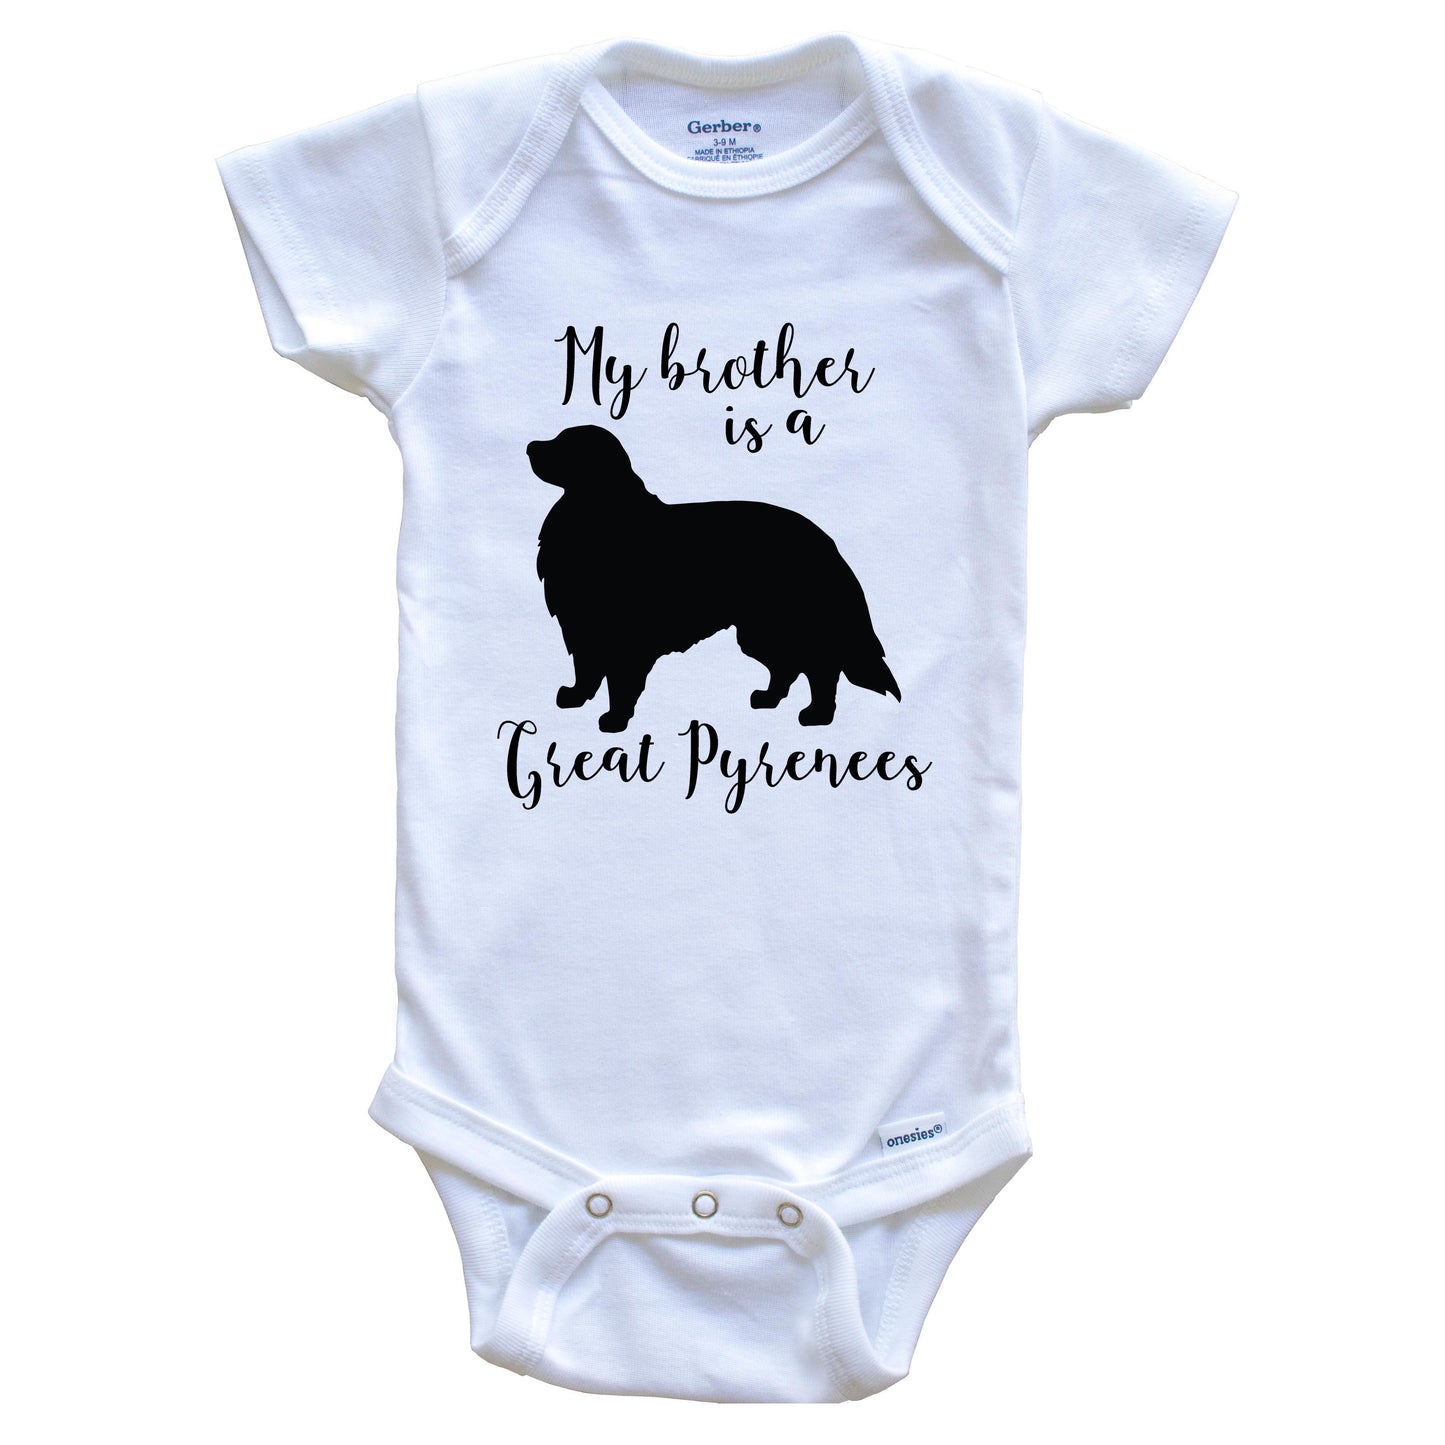 My Brother Is A Great Pyrenees Cute Dog Baby Onesie - Great Pyrenees One Piece Baby Bodysuit